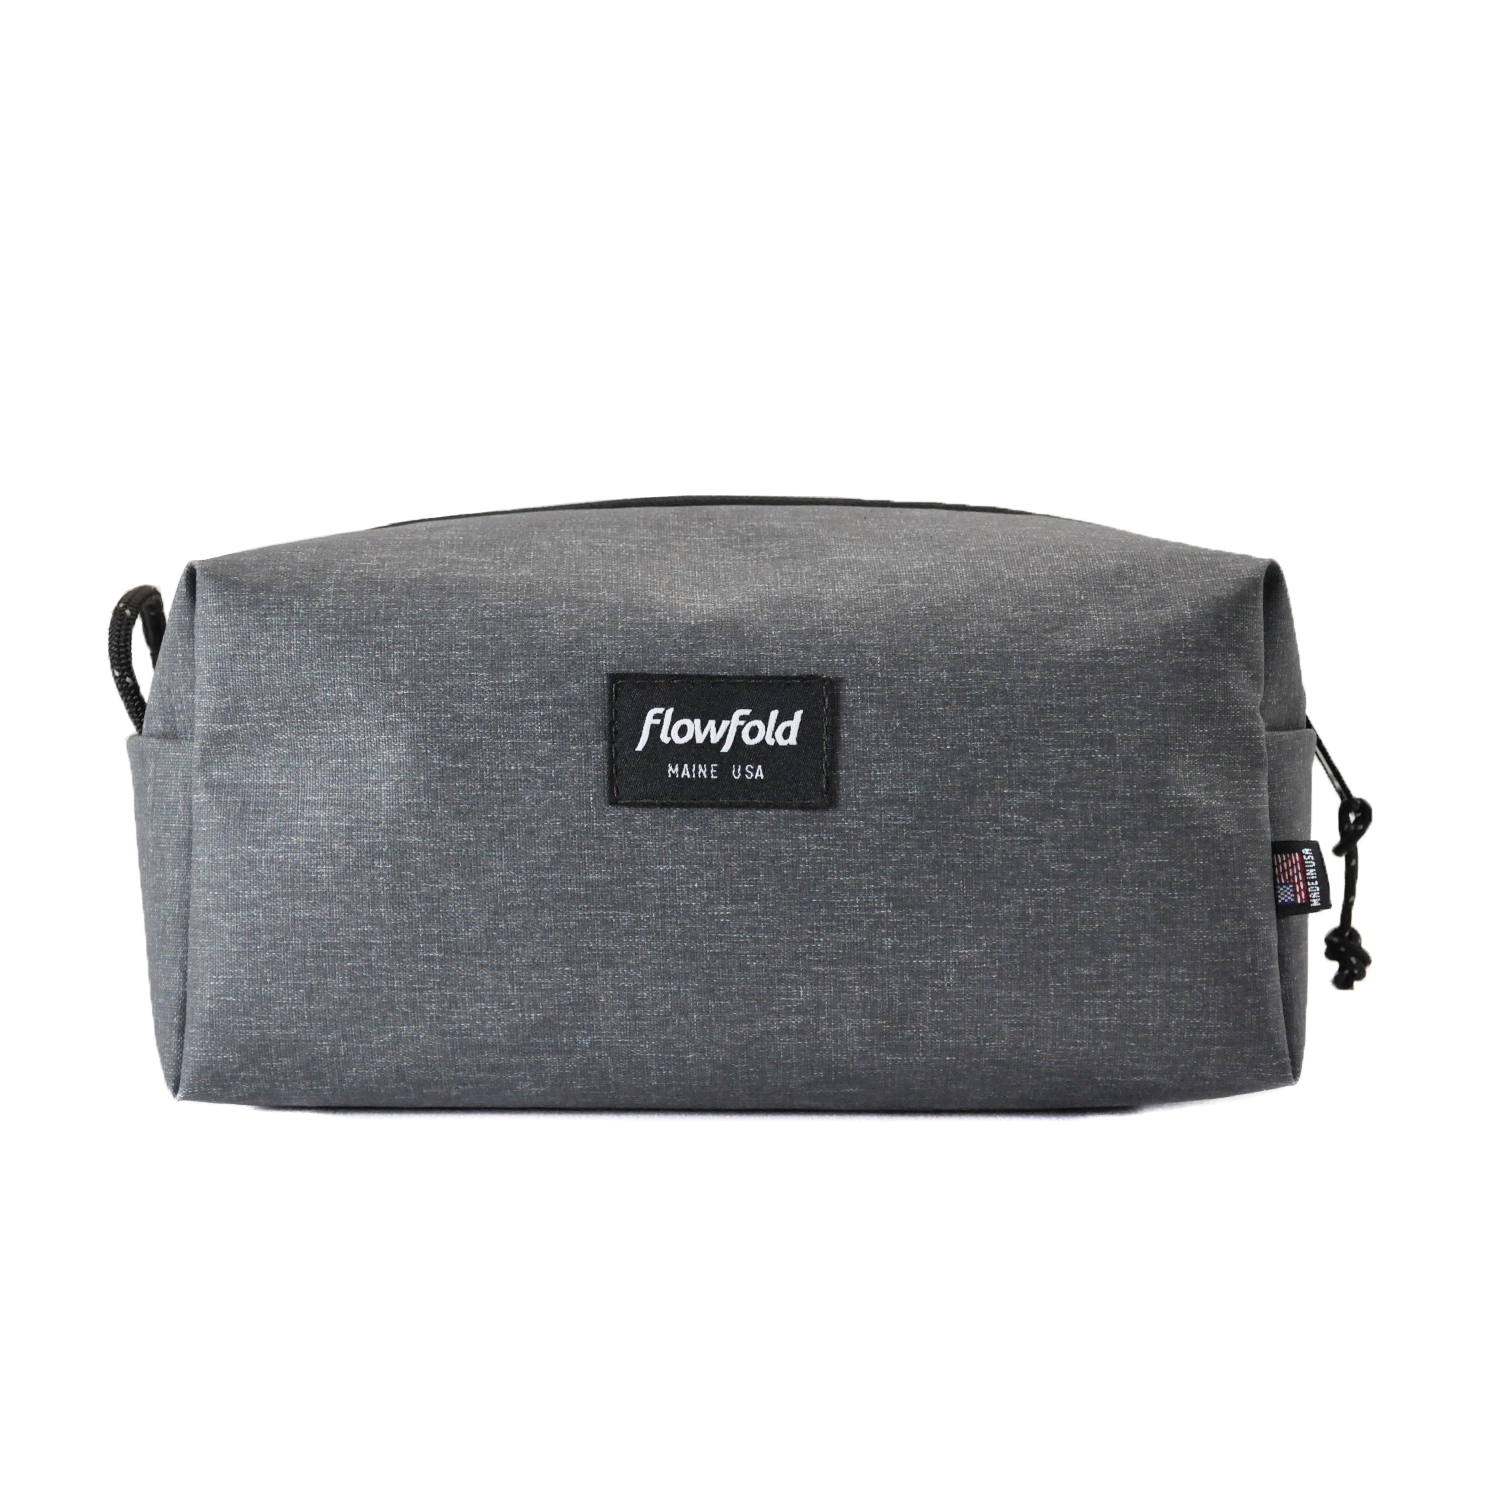 Flowfold Bar Harbor Kit: Stormproof Dopp Kit for travel and road trips, Heather Grey